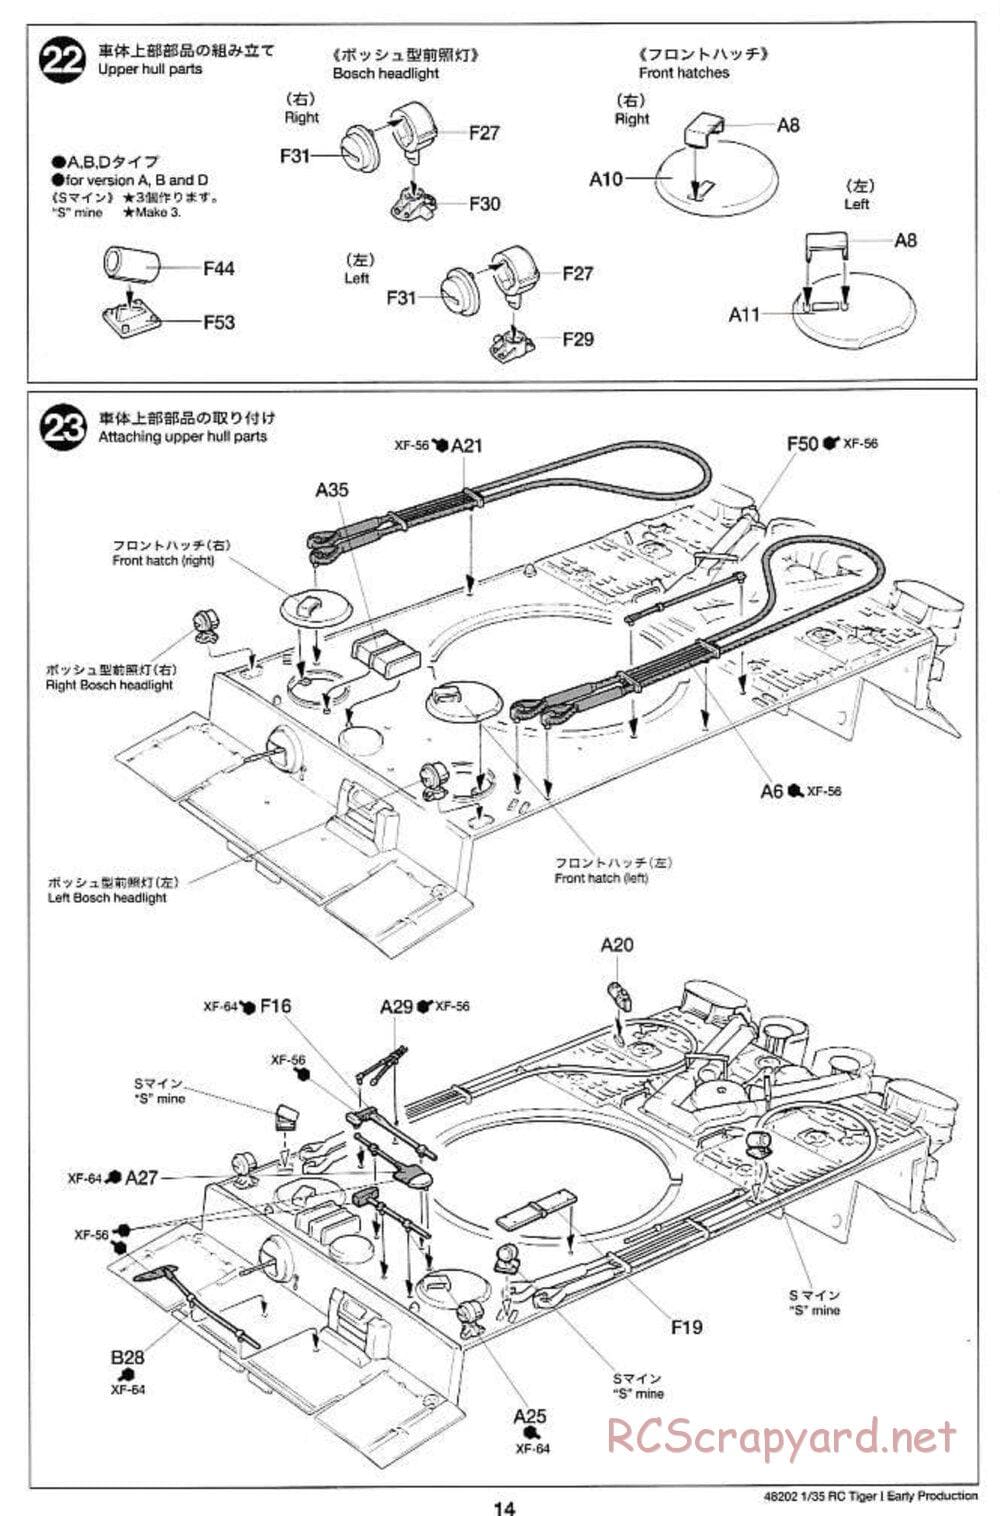 Tamiya - German Tiger 1 Early Production - 1/35 Scale Chassis - Manual - Page 14